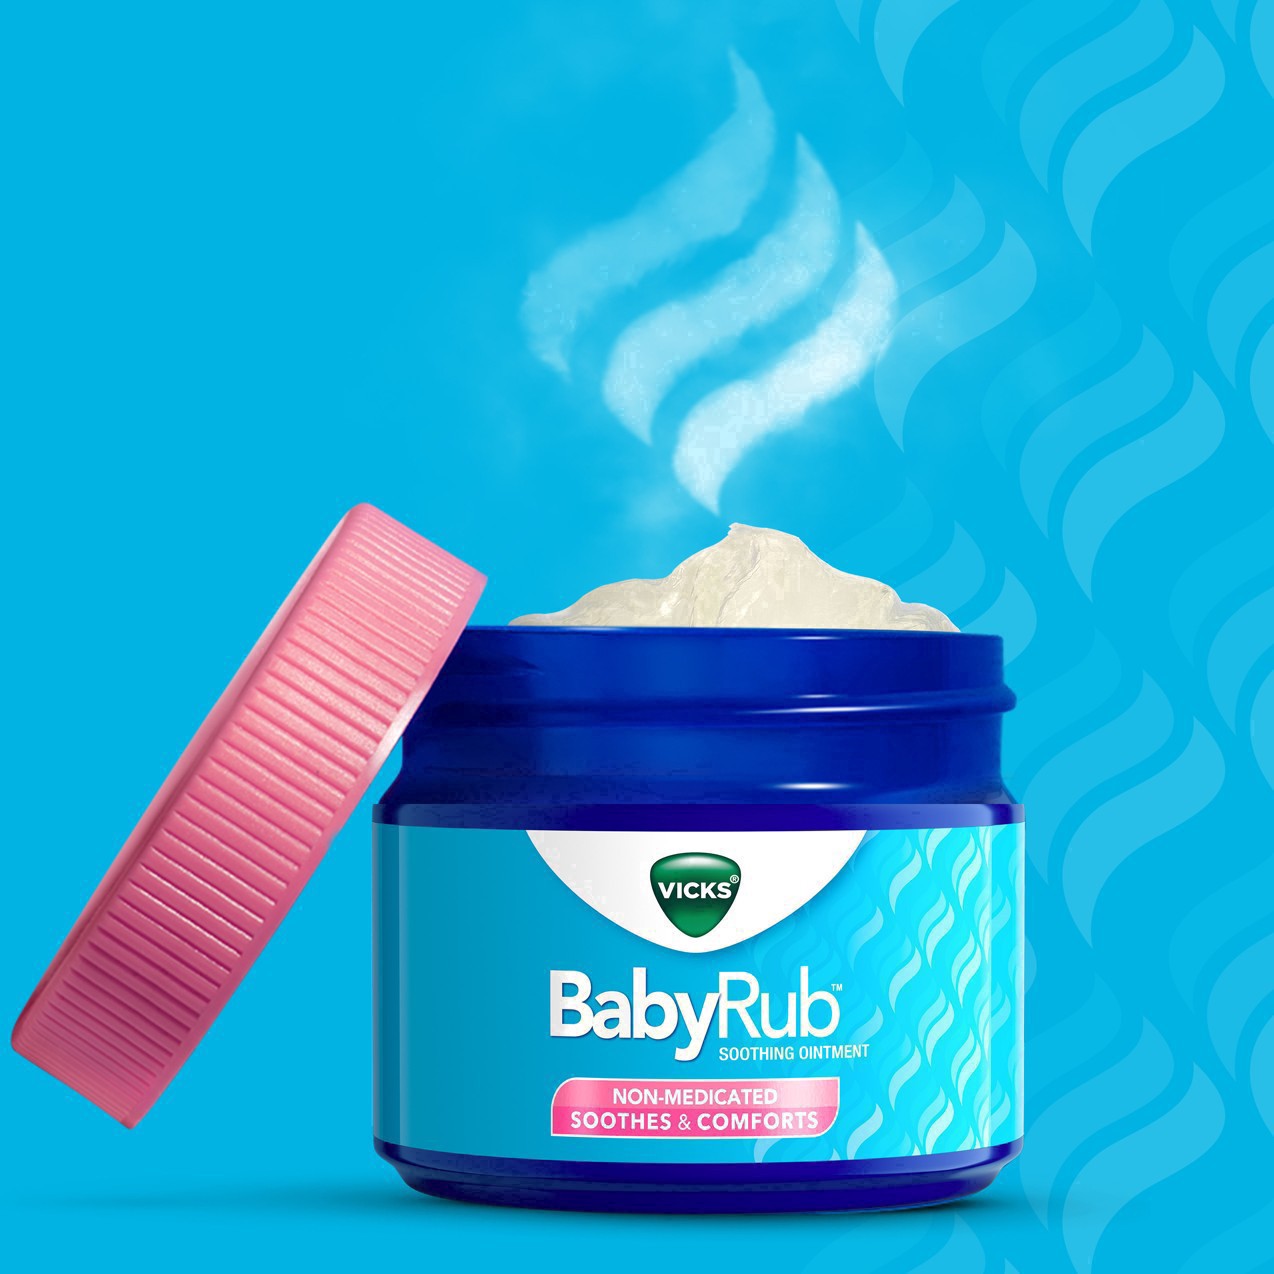 slide 6 of 78, Vicks BabyRub, Chest Rub Ointment with Soothing Aloe, Eucalyptus, Lavender, and Rosemary, from The Makers of VapoRub, 1.76 oz, 1.76 oz